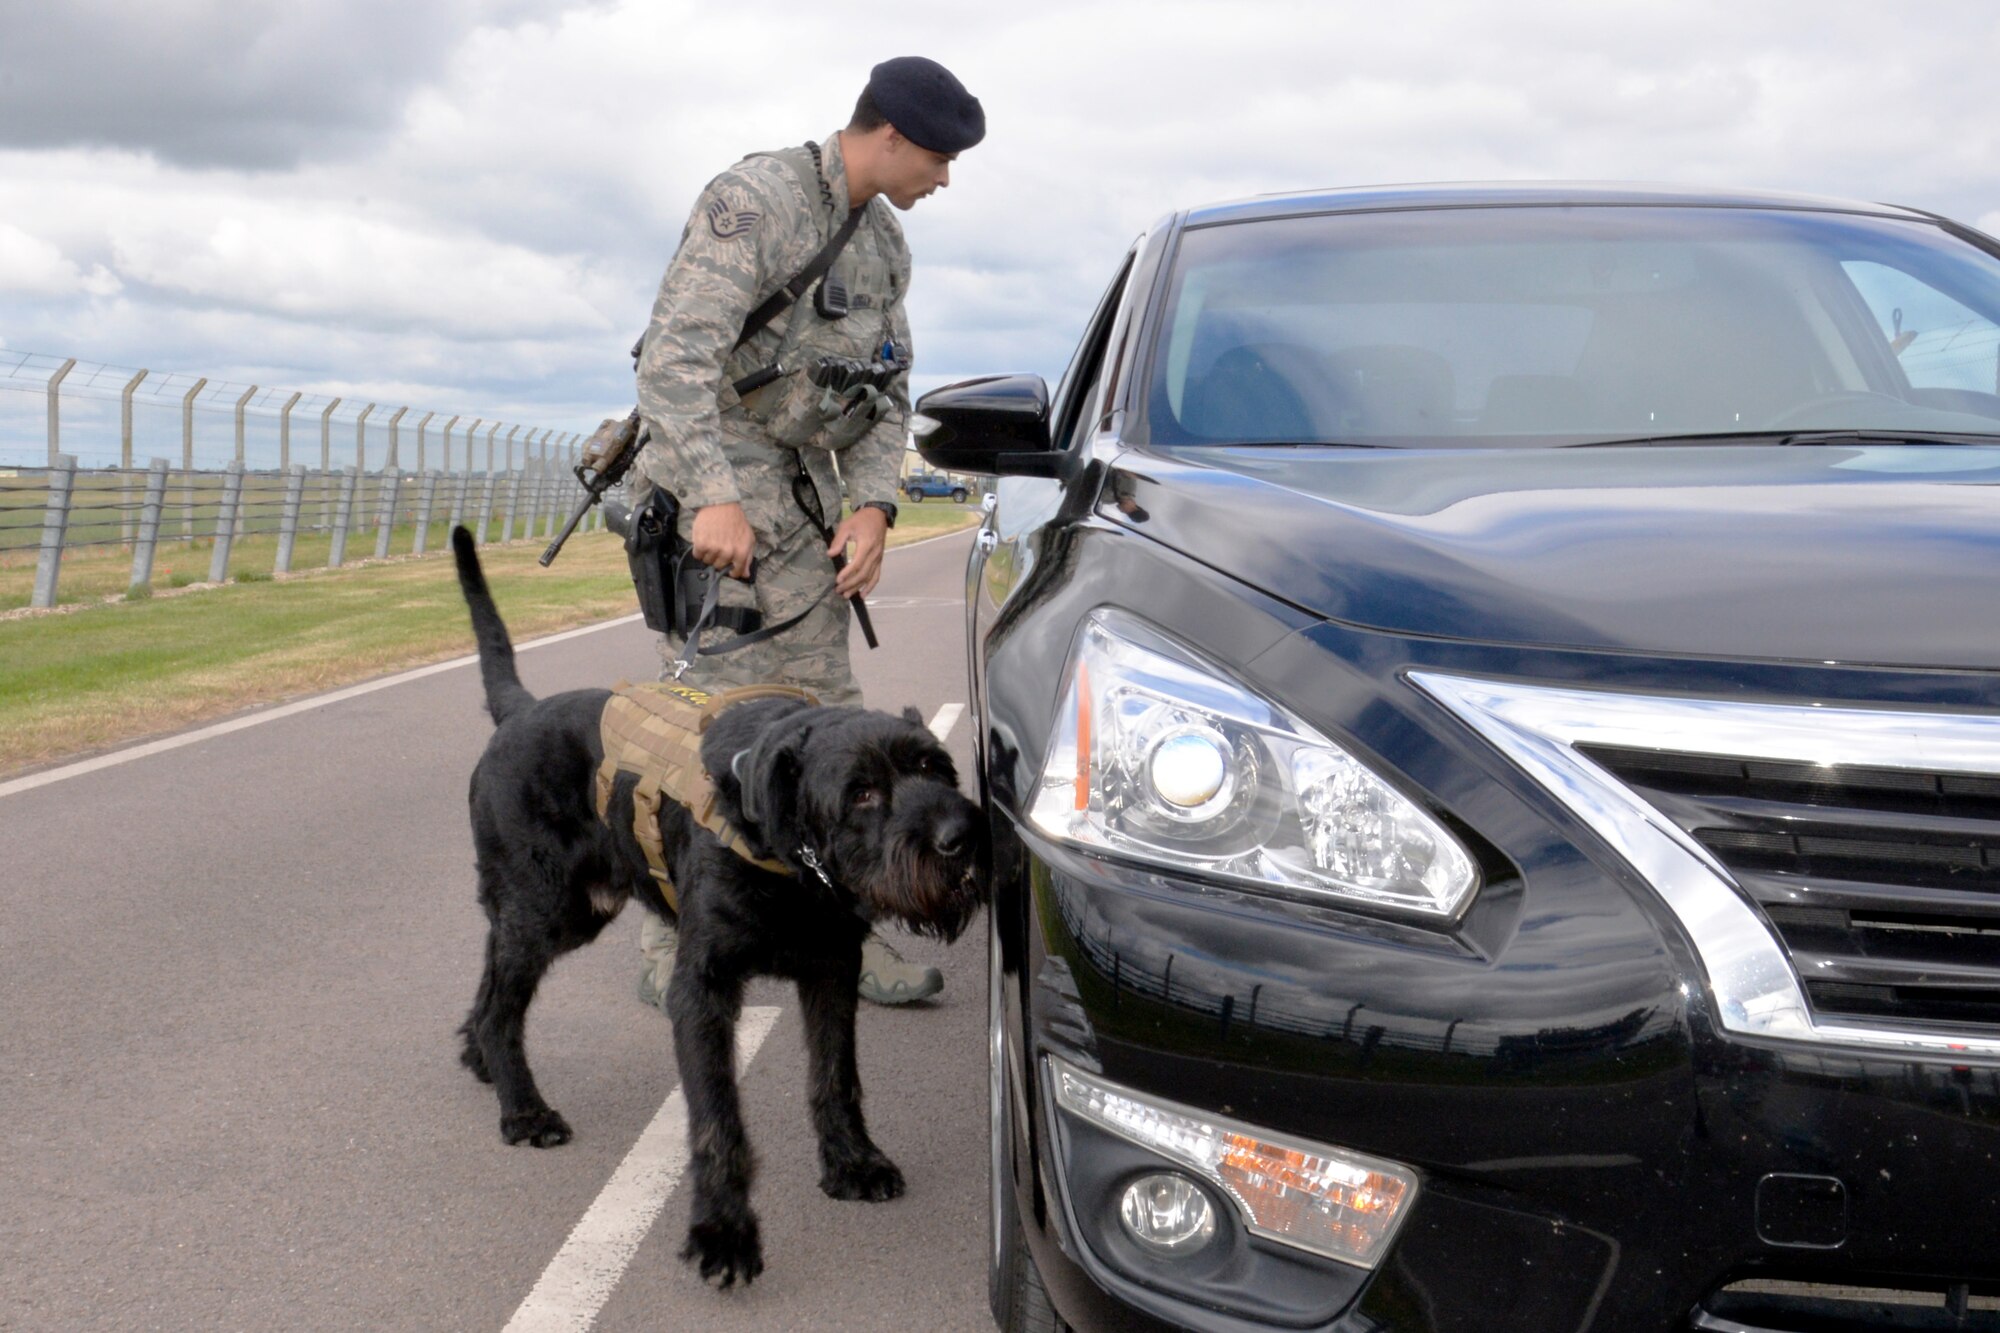 U.S. Air Force Staff Sgt. Alexandre Rogan, 100th Security Forces Squadron Military Working Dog trainer, and MWD Brock inspect a vehicle in response to a simulated security incident during an exercise at RAF Mildenhall, England, June 20, 2018. Such exercises are regularly scheduled to test responsiveness and readiness of base personnel. (U.S. Air Force photo by Tech. Sgt. David Dobrydney)